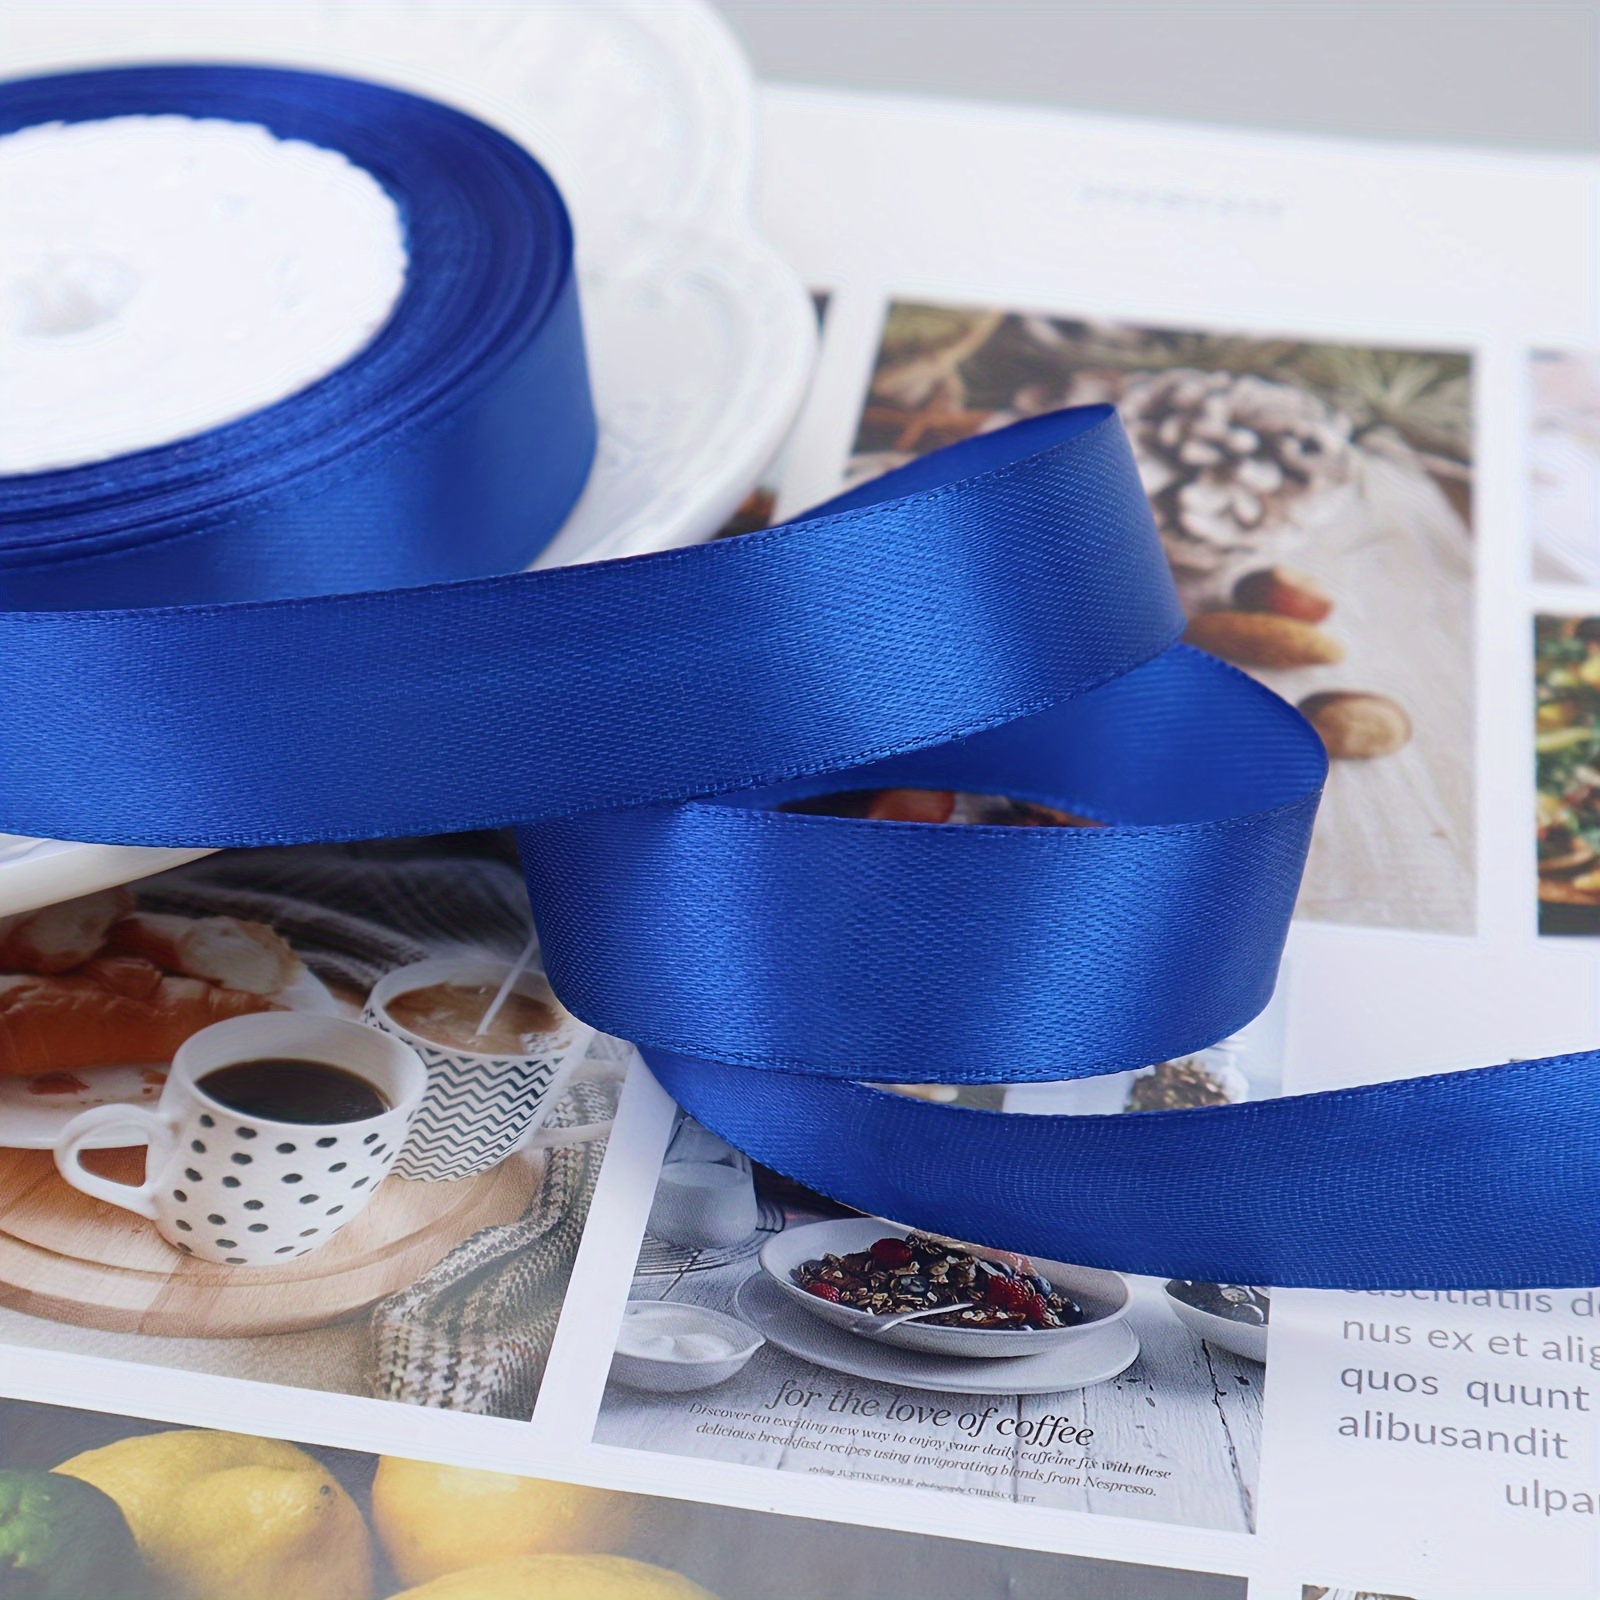 Navy Blue Ribbon 1 Inch x 25 Yards, Dark Blue Satin Fabric Silk Ribbon for  Gift Wrapping, Bows Making, Floral Bouquets, Wreaths, DIY Handicrafts